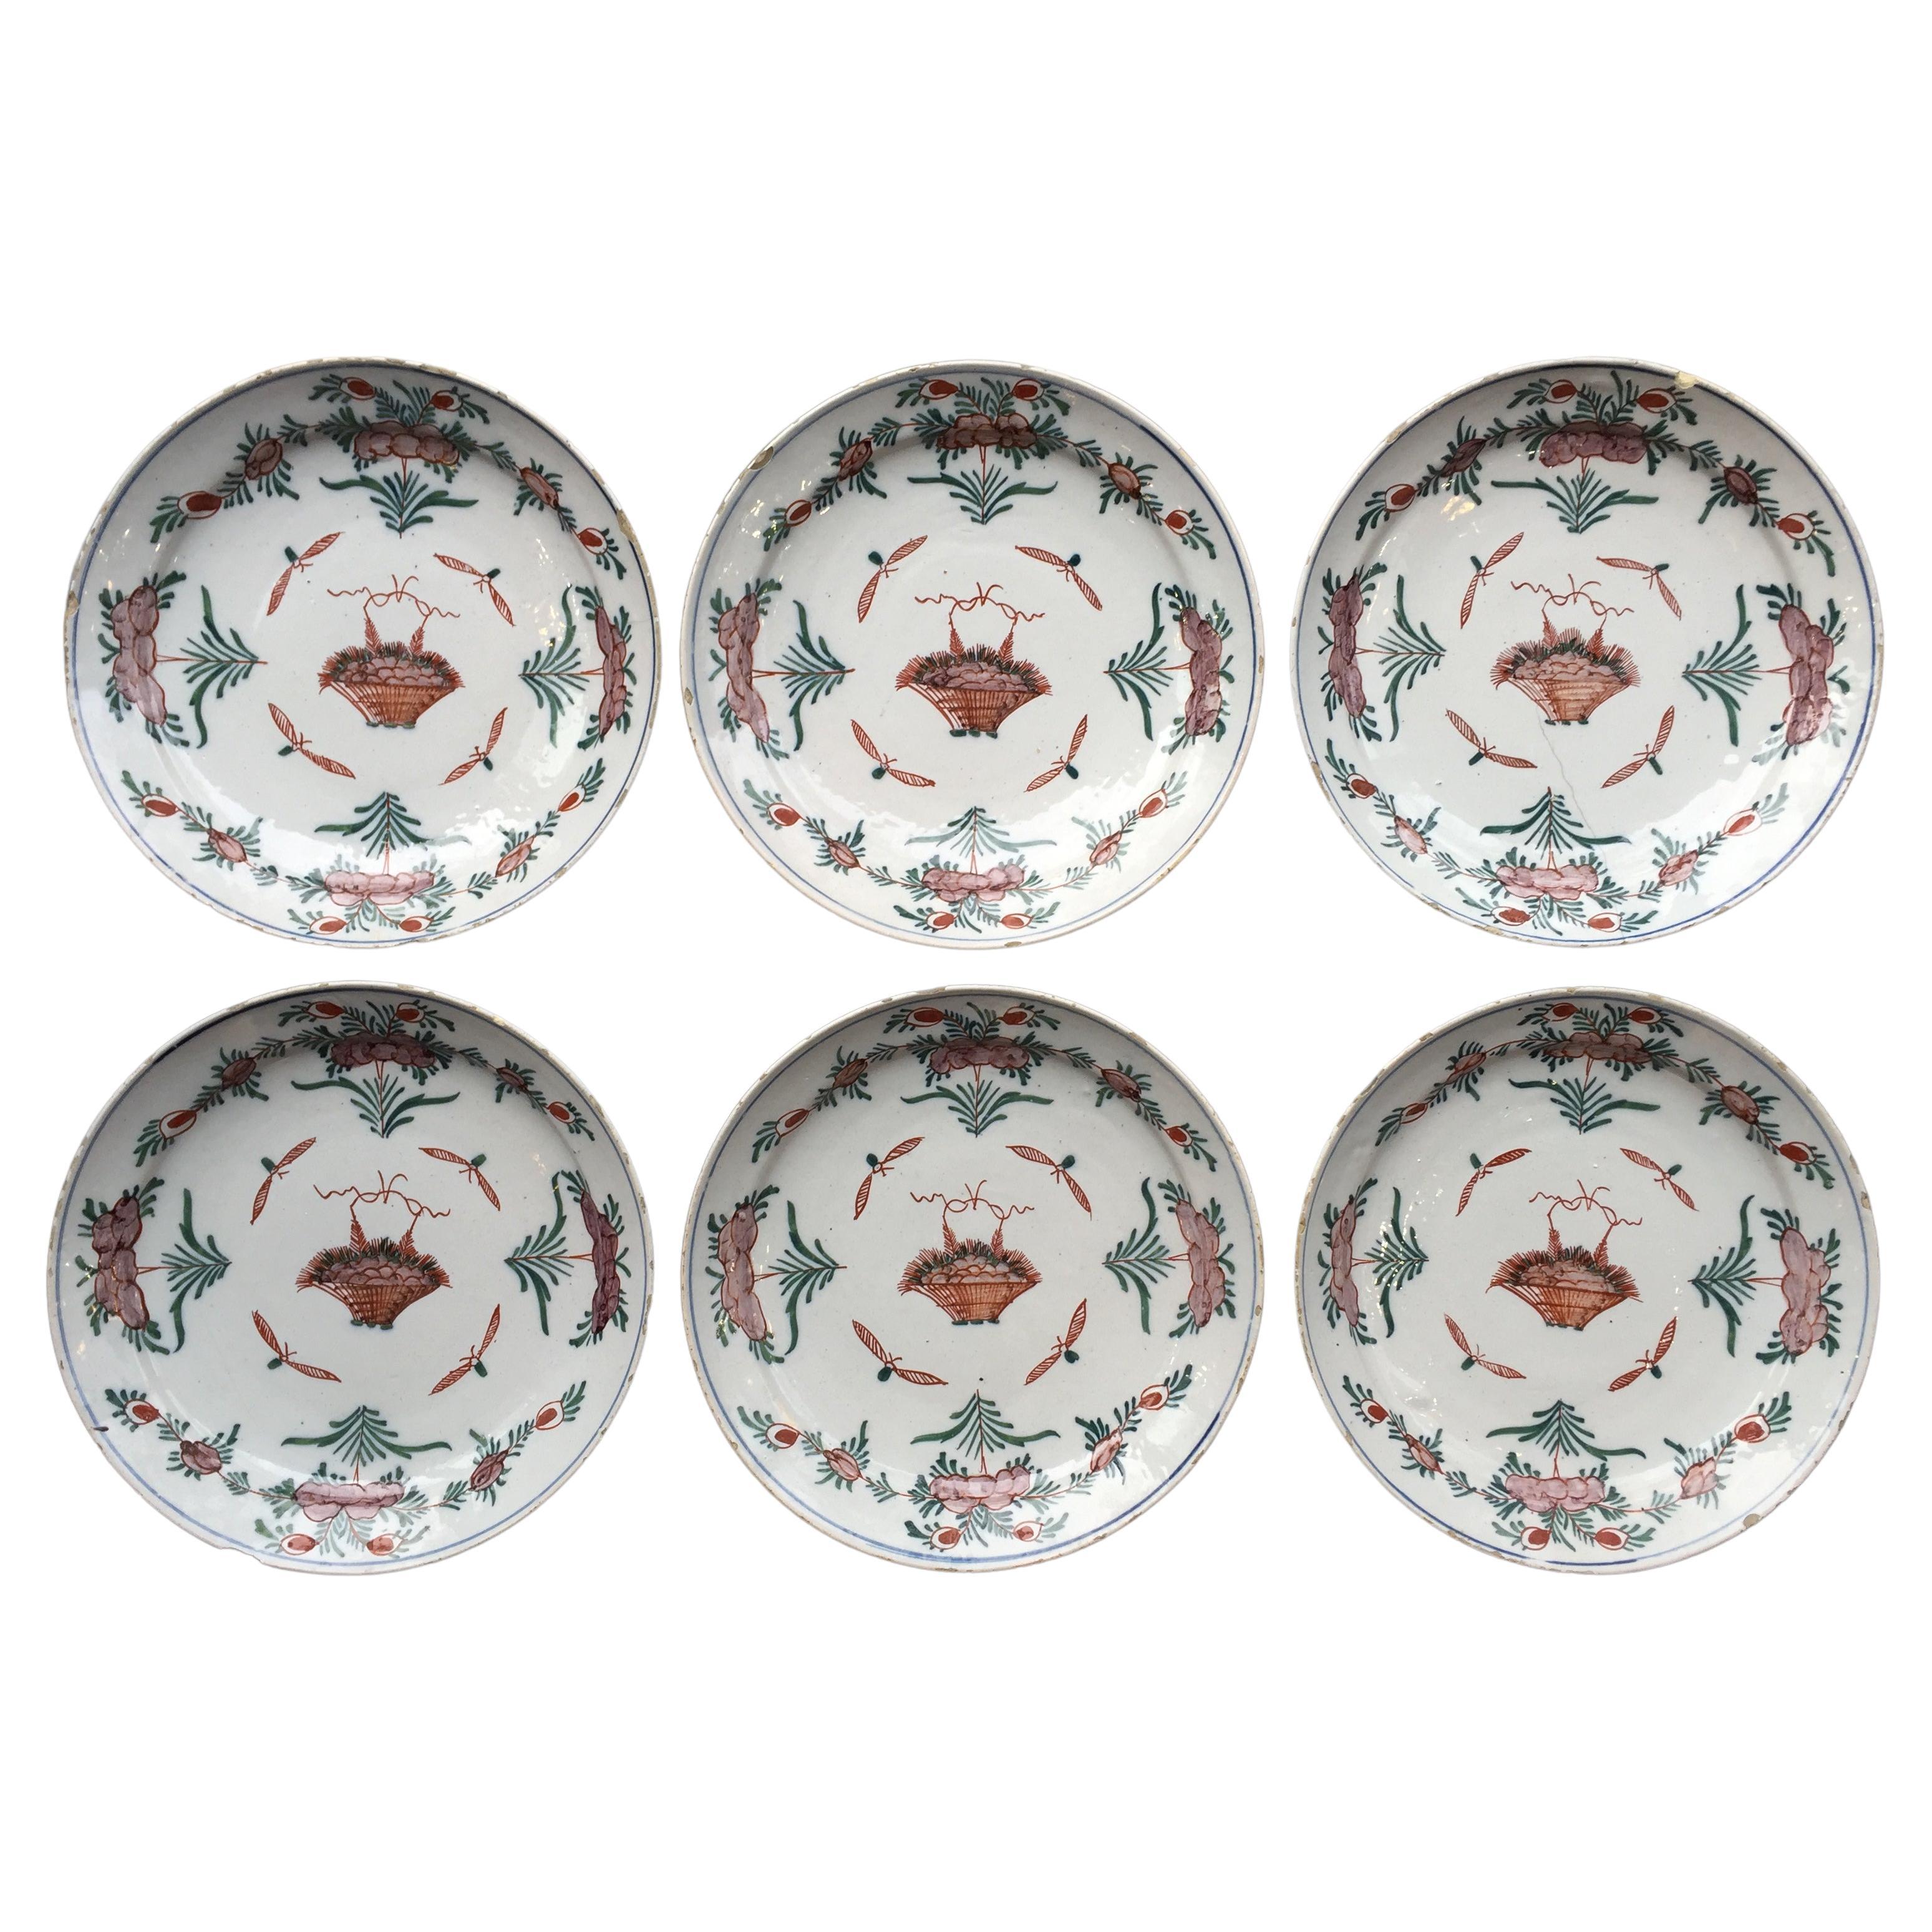 Set of 6 Dutch Delft Plates with Flower Baskets, 18th Century For Sale